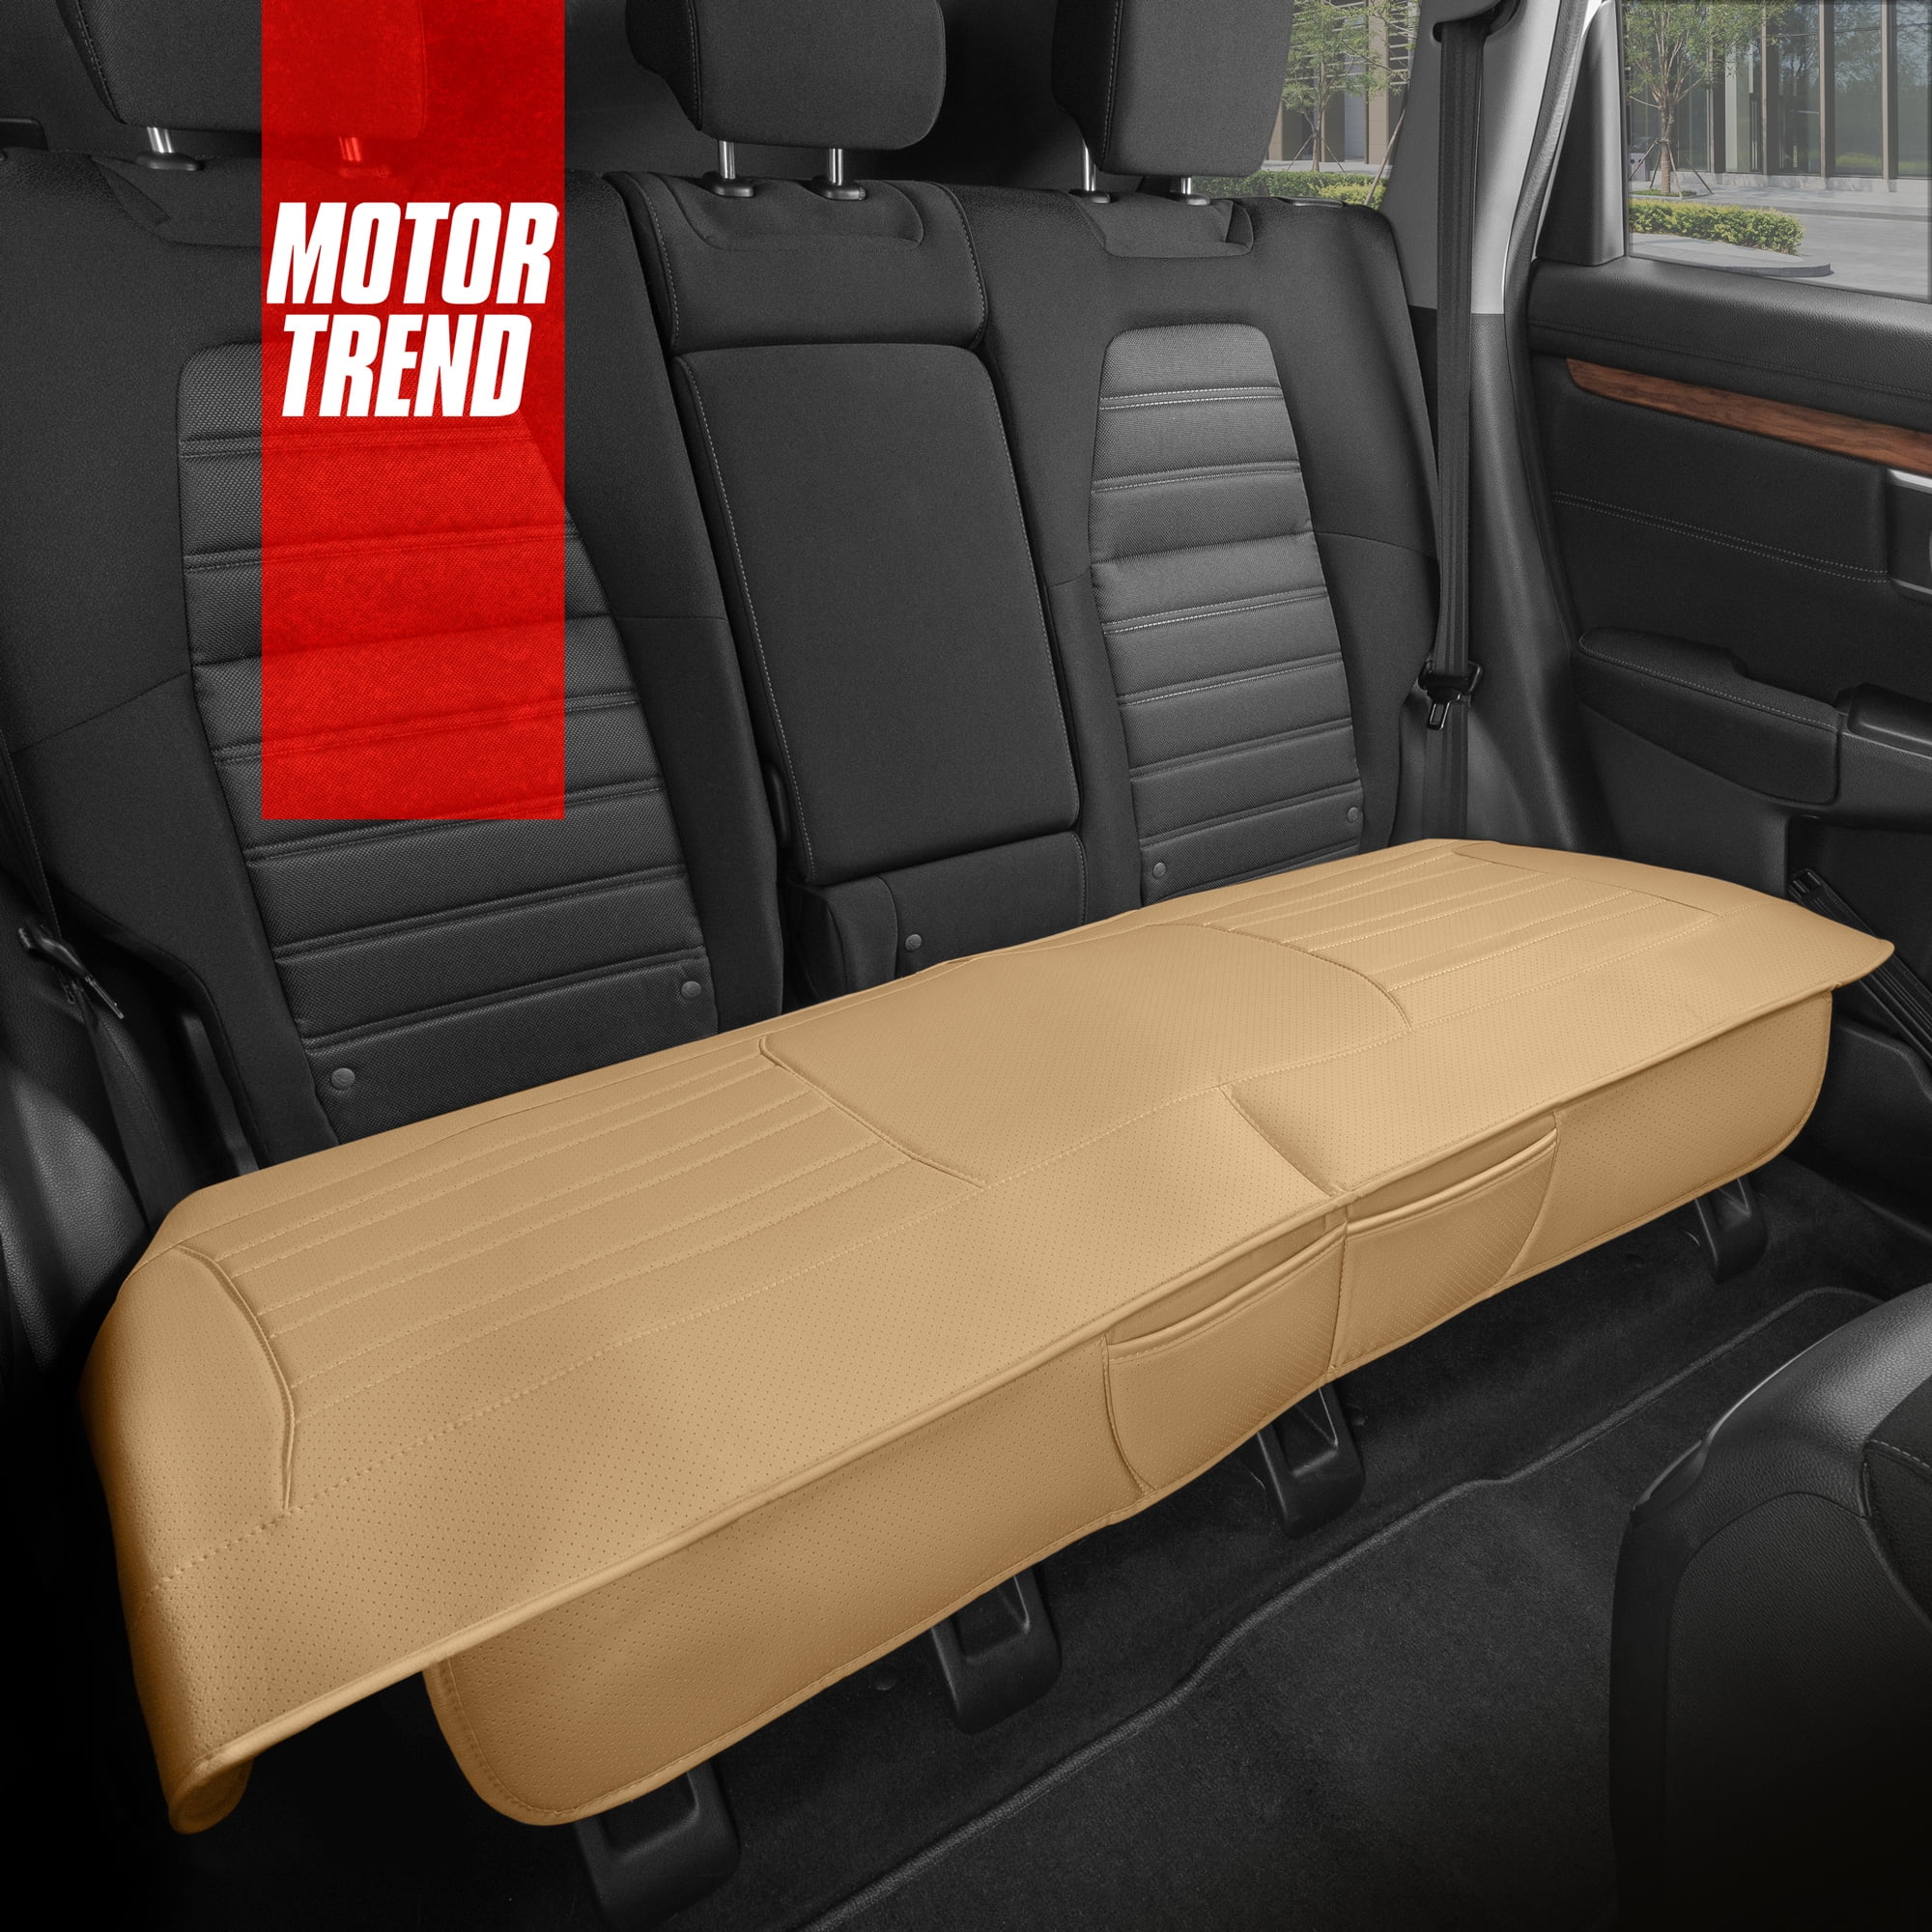  Motor Trend Faux Leather Seat Cover for Cars, 1 Piece – Premium Car  Seat Cushion for Front Seat, Padded Car Seat Protector with Storage Pocket, Seat  Cover for Cars Trucks SUV (